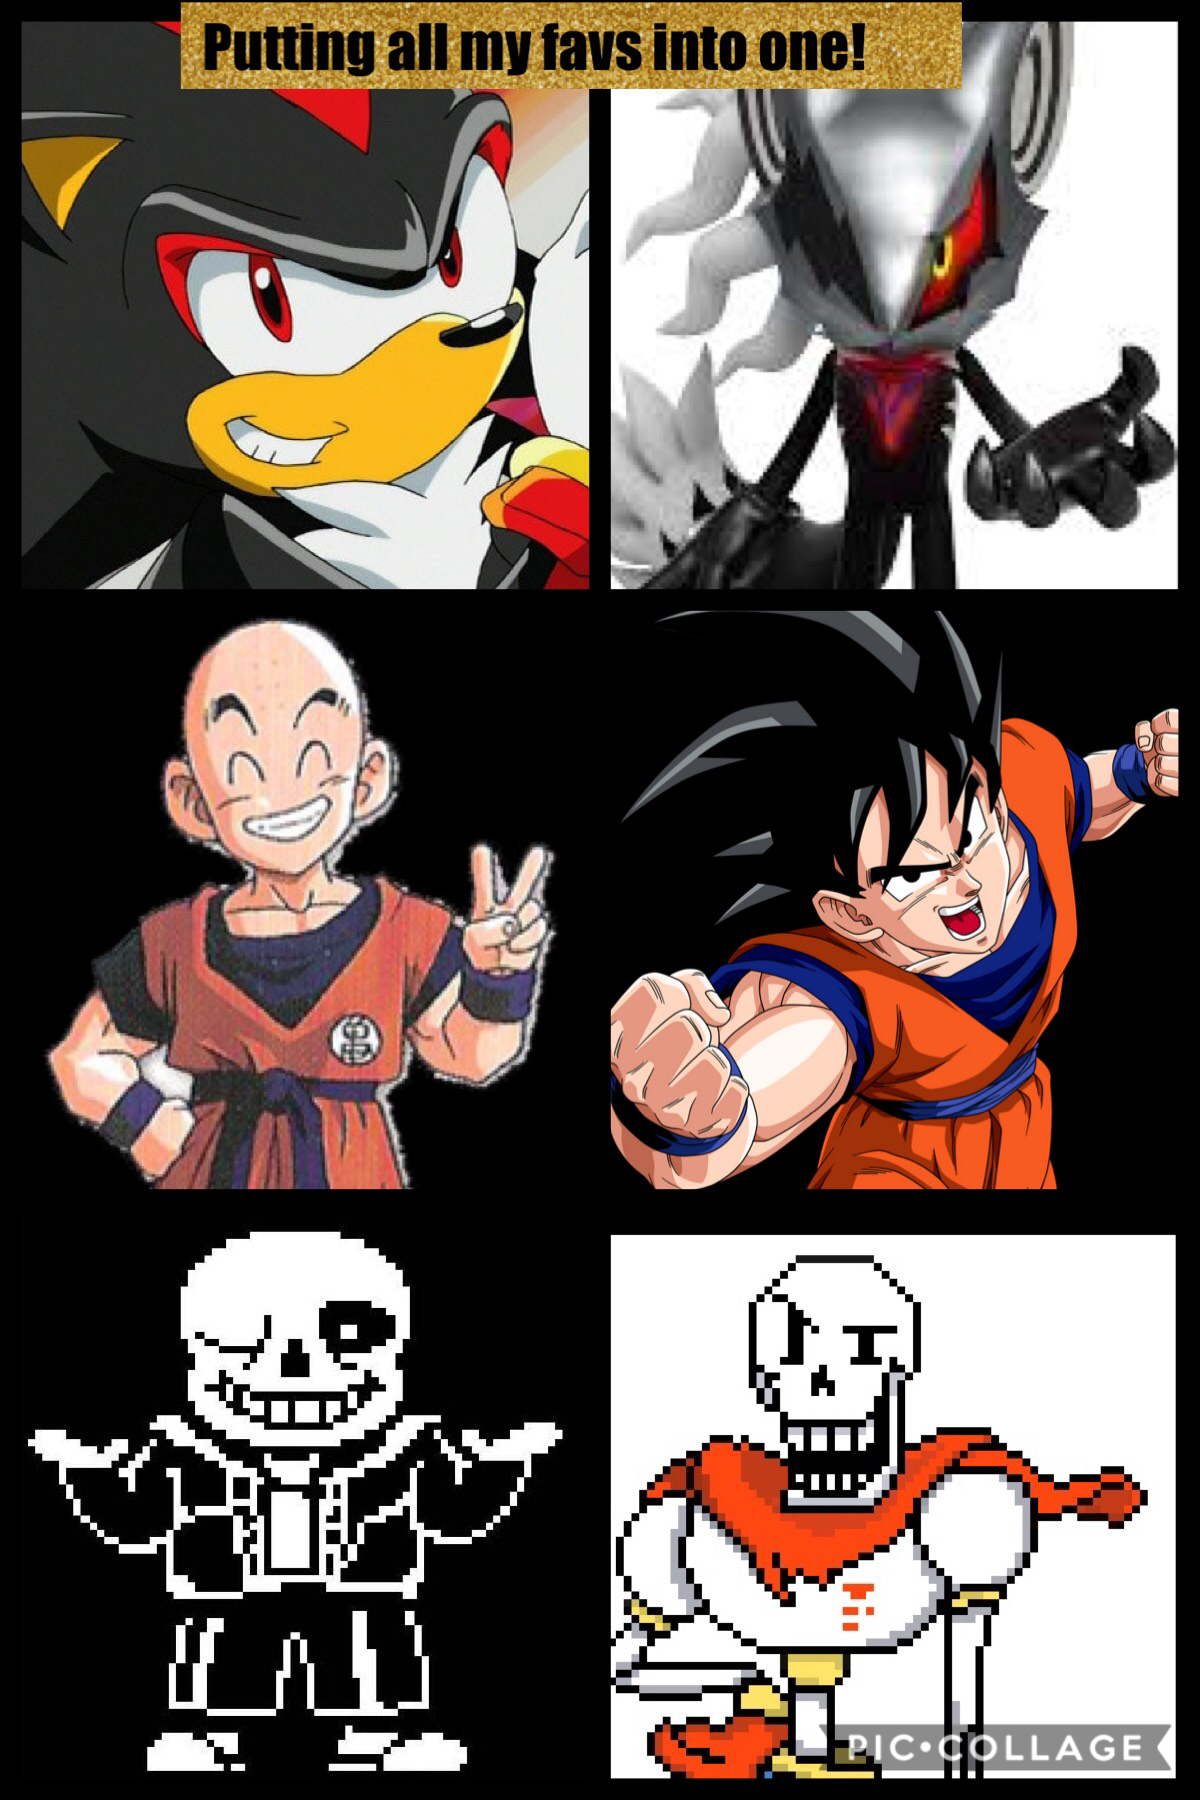 These are all my favorites. We first have Shadow, then Infinite, Krillin, Goku, Sans, and Papyrus! Who’s YOUR fav? Comment down below!